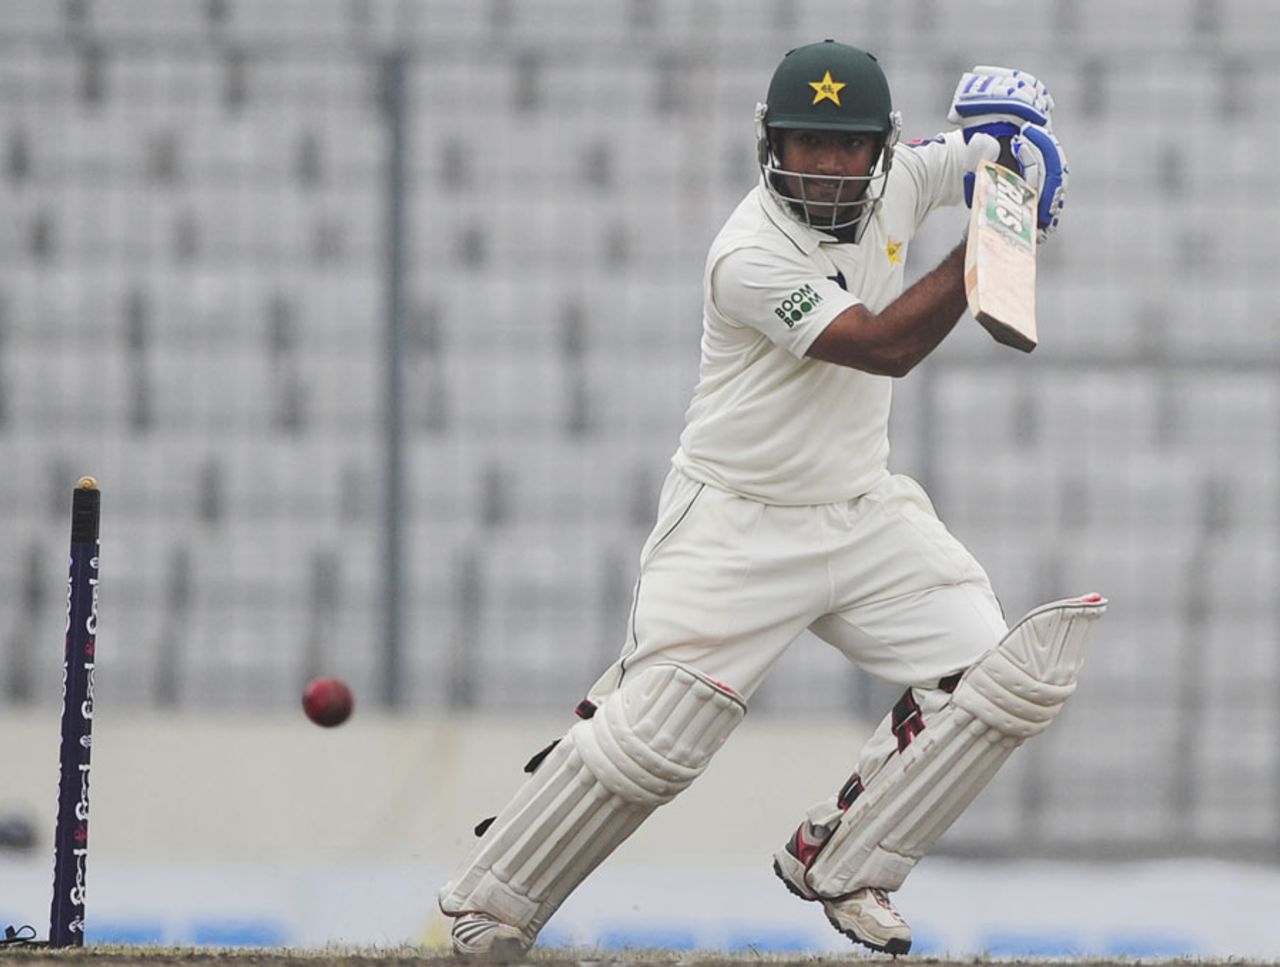 Asad Shafiq punches the ball towards point, Bangladesh v Pakistan, 2nd Test, Mirpur, 4th day, December 20, 2011 